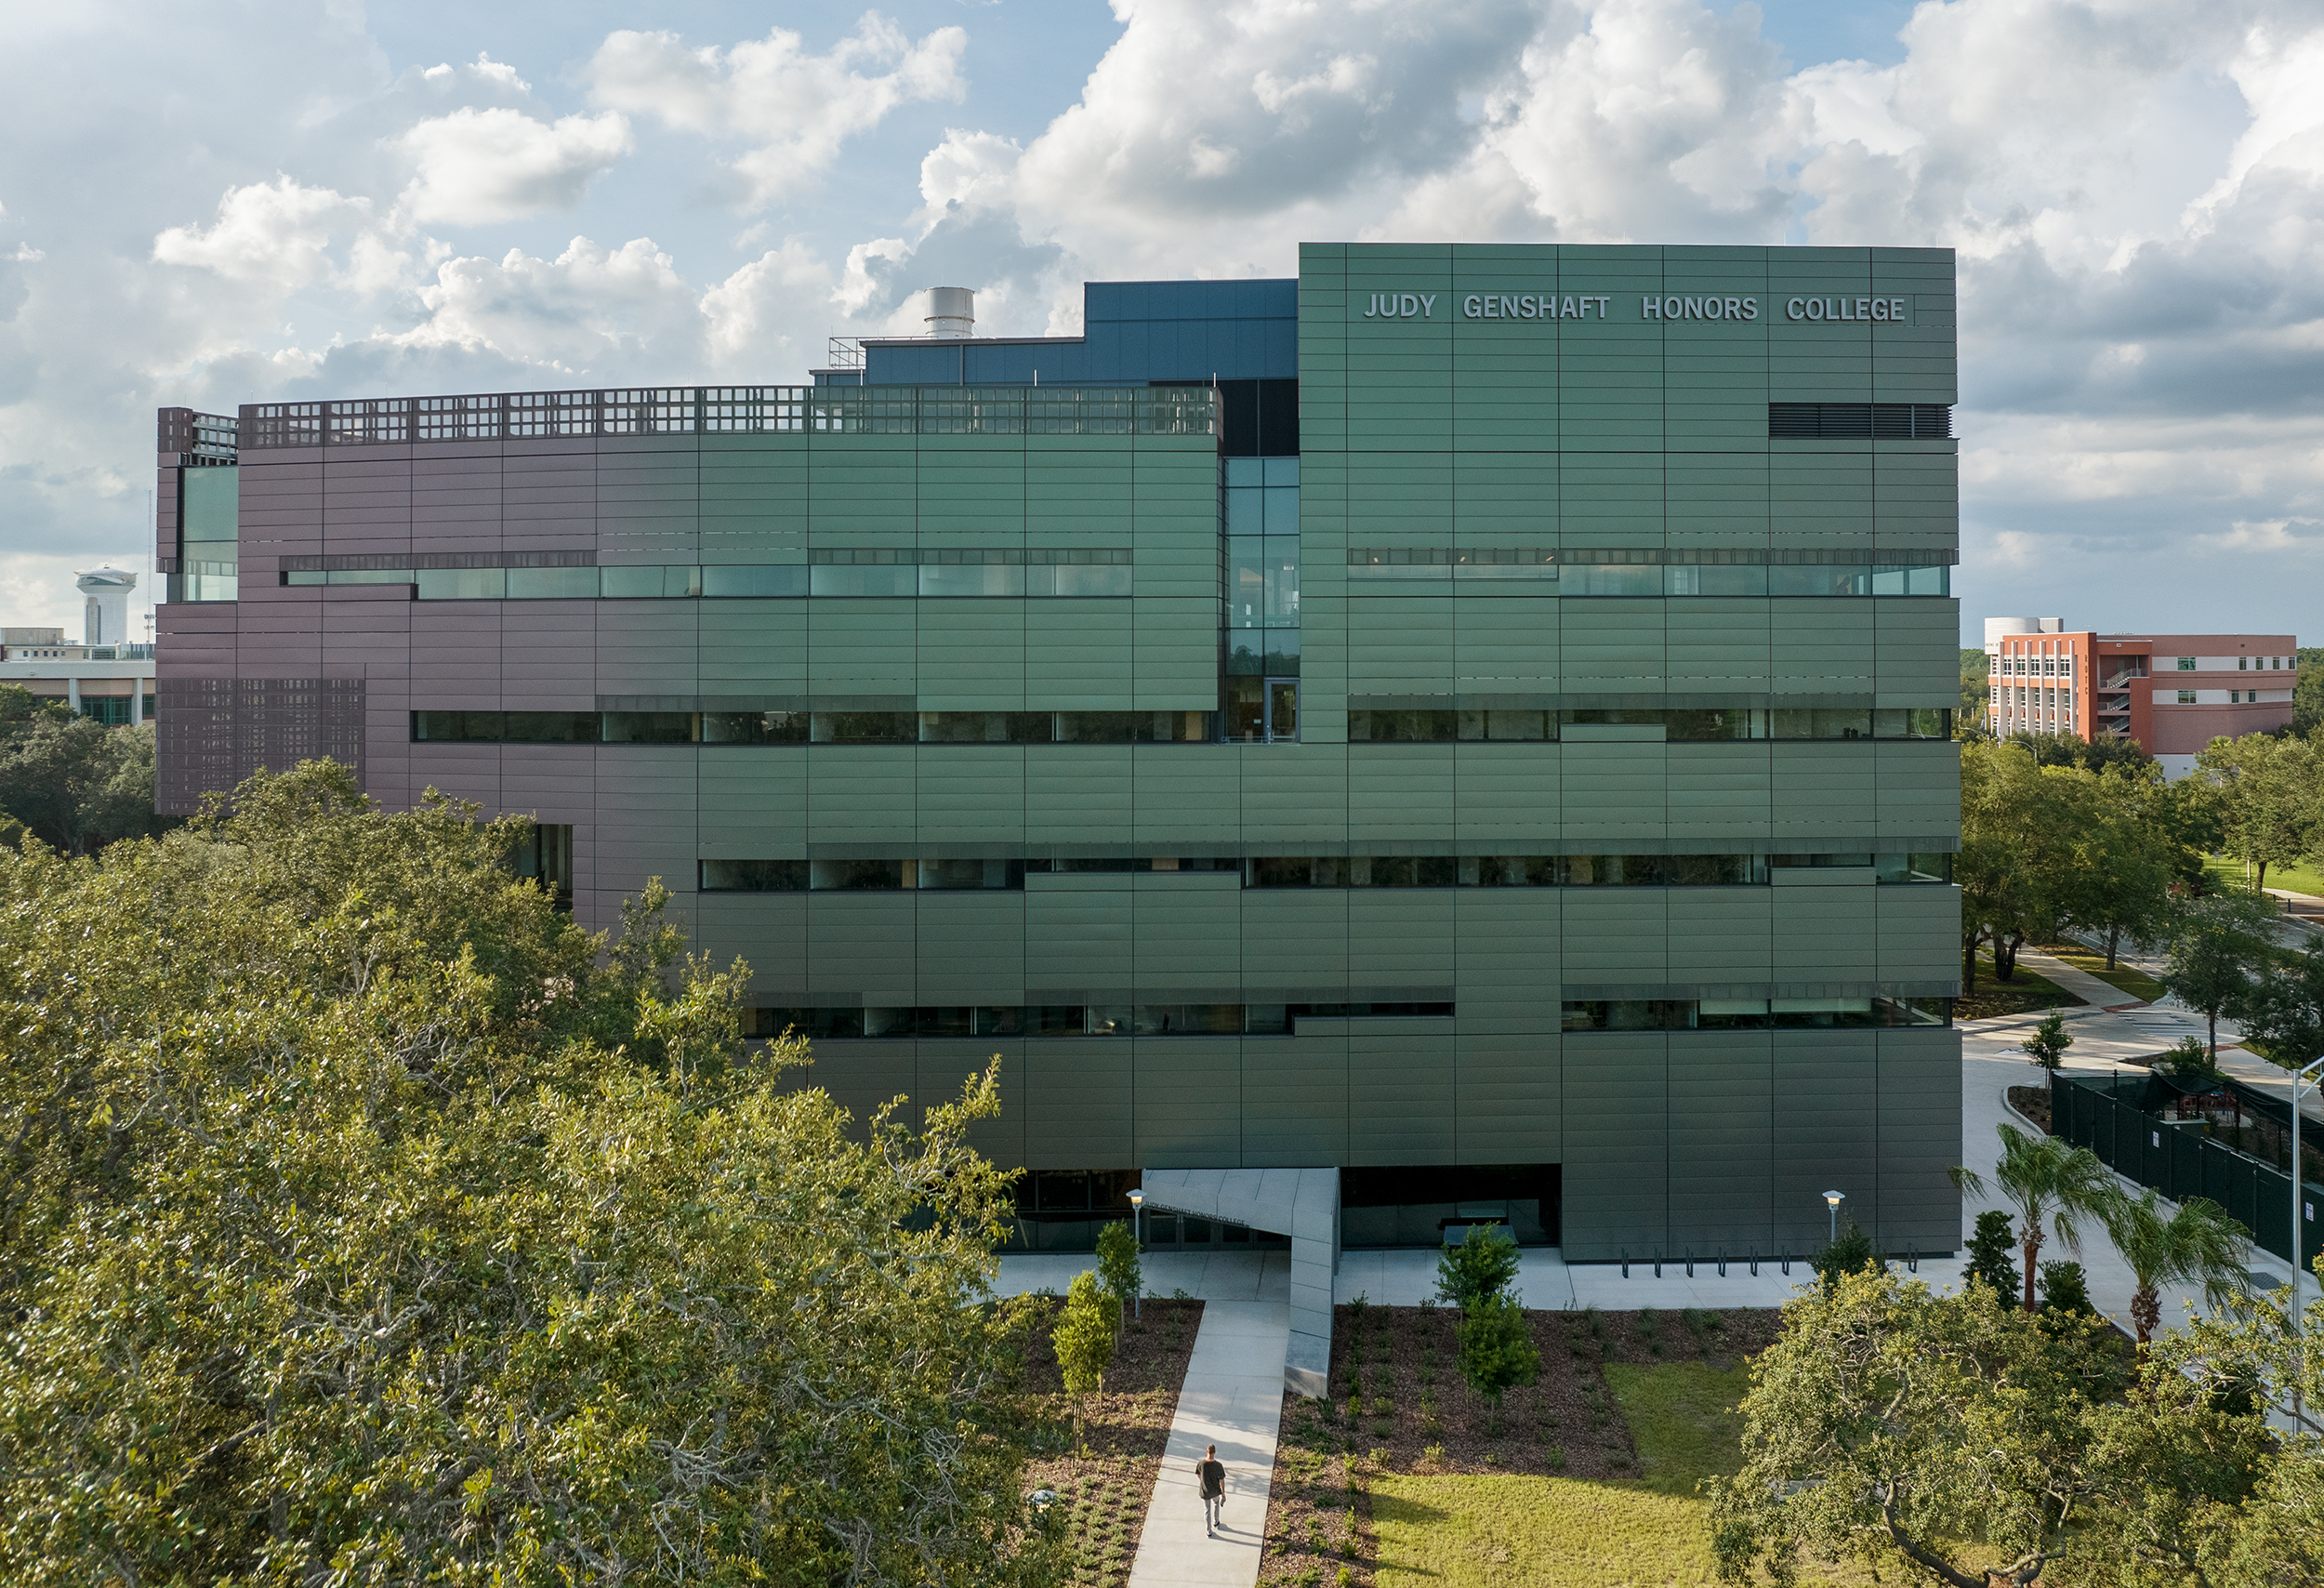 The Judy Genshaft Honors College at USF